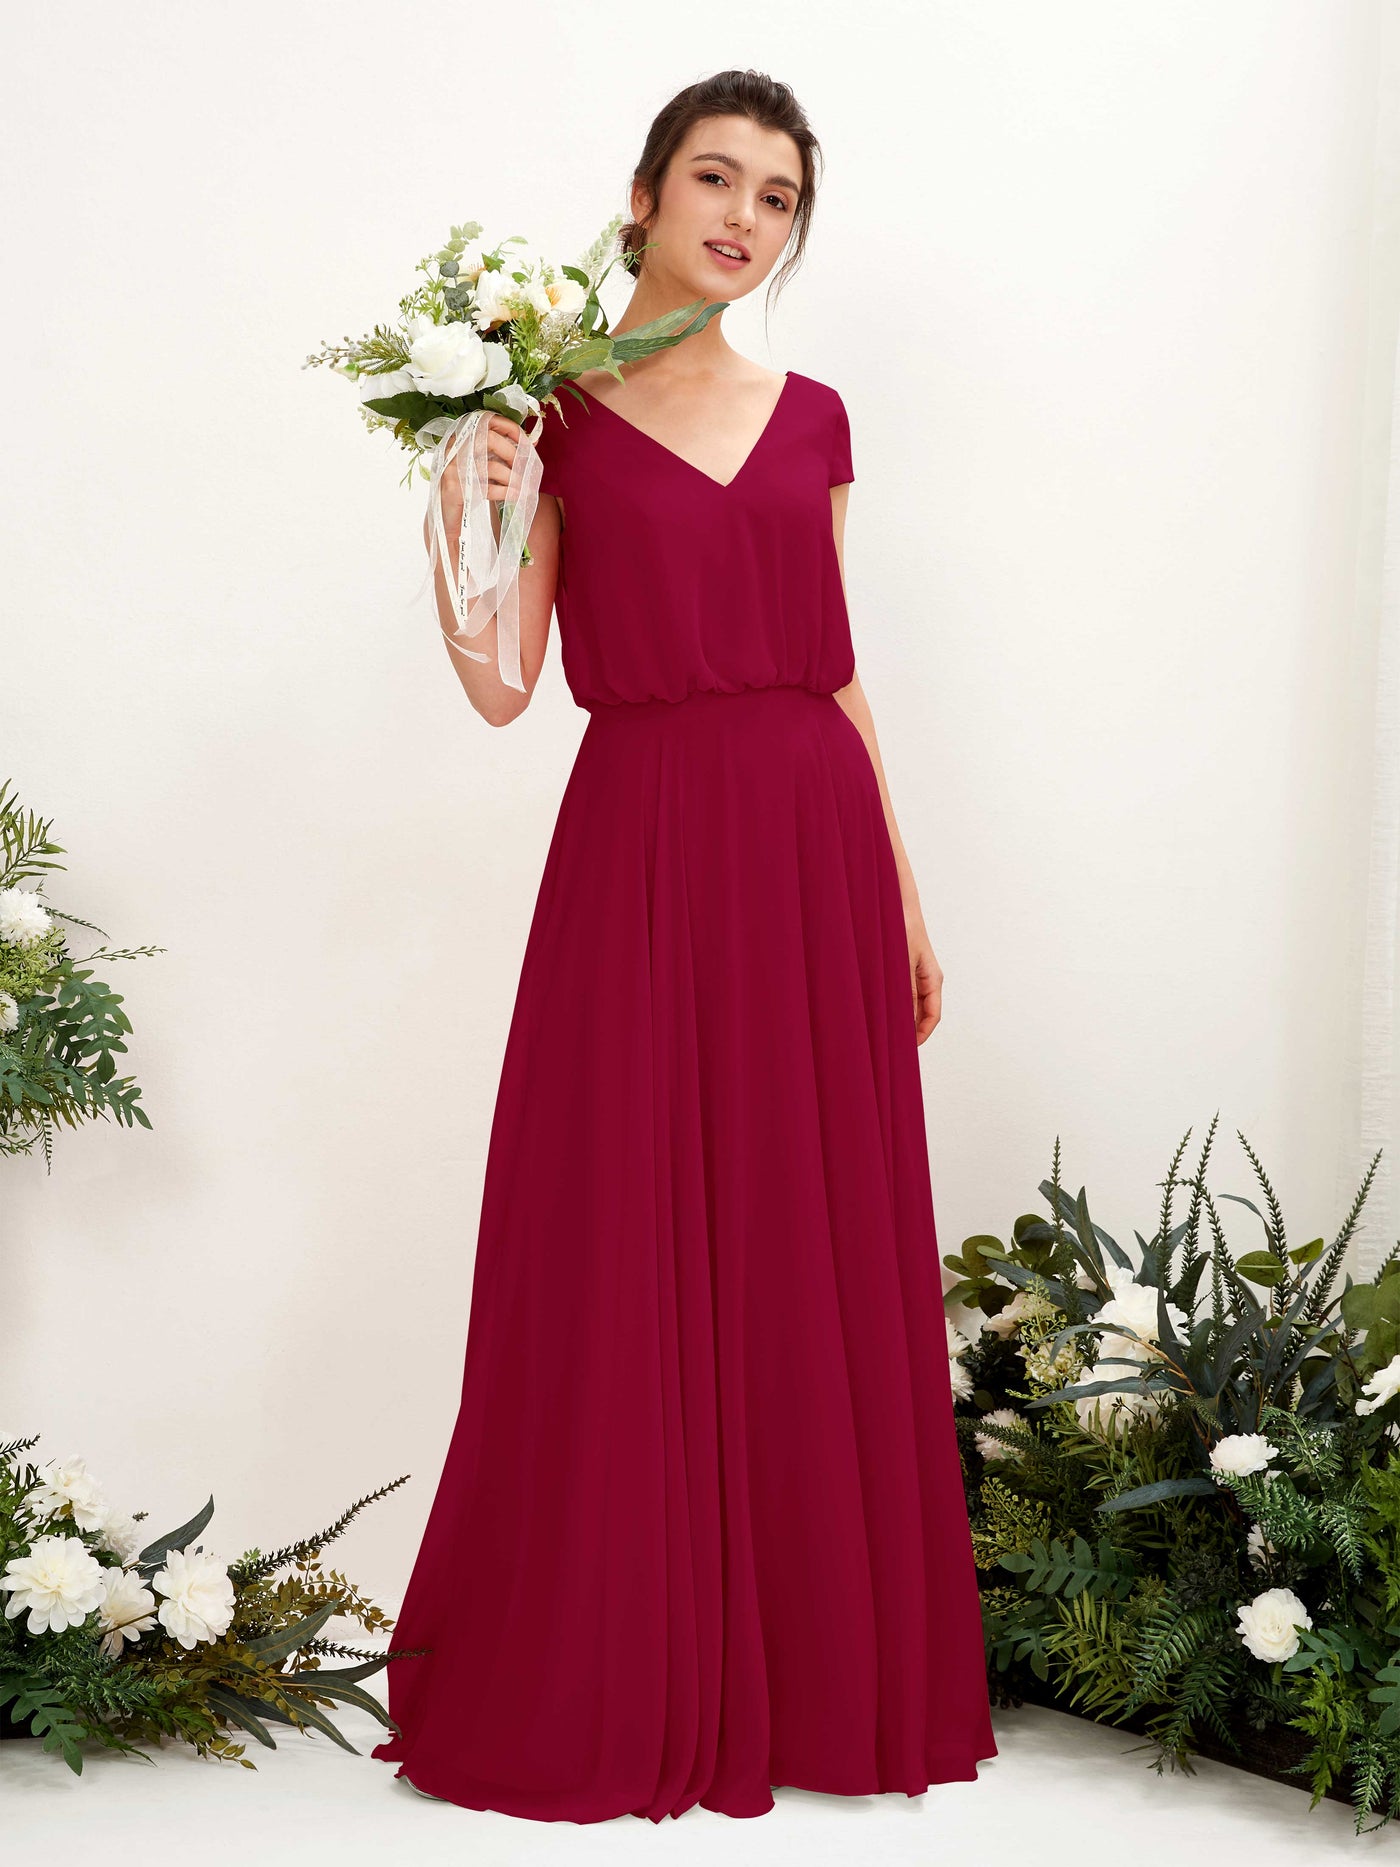 Jester Red Bridesmaid Dresses Bridesmaid Dress A-line Chiffon V-neck Full Length Short Sleeves Wedding Party Dress (81221841)#color_jester-red